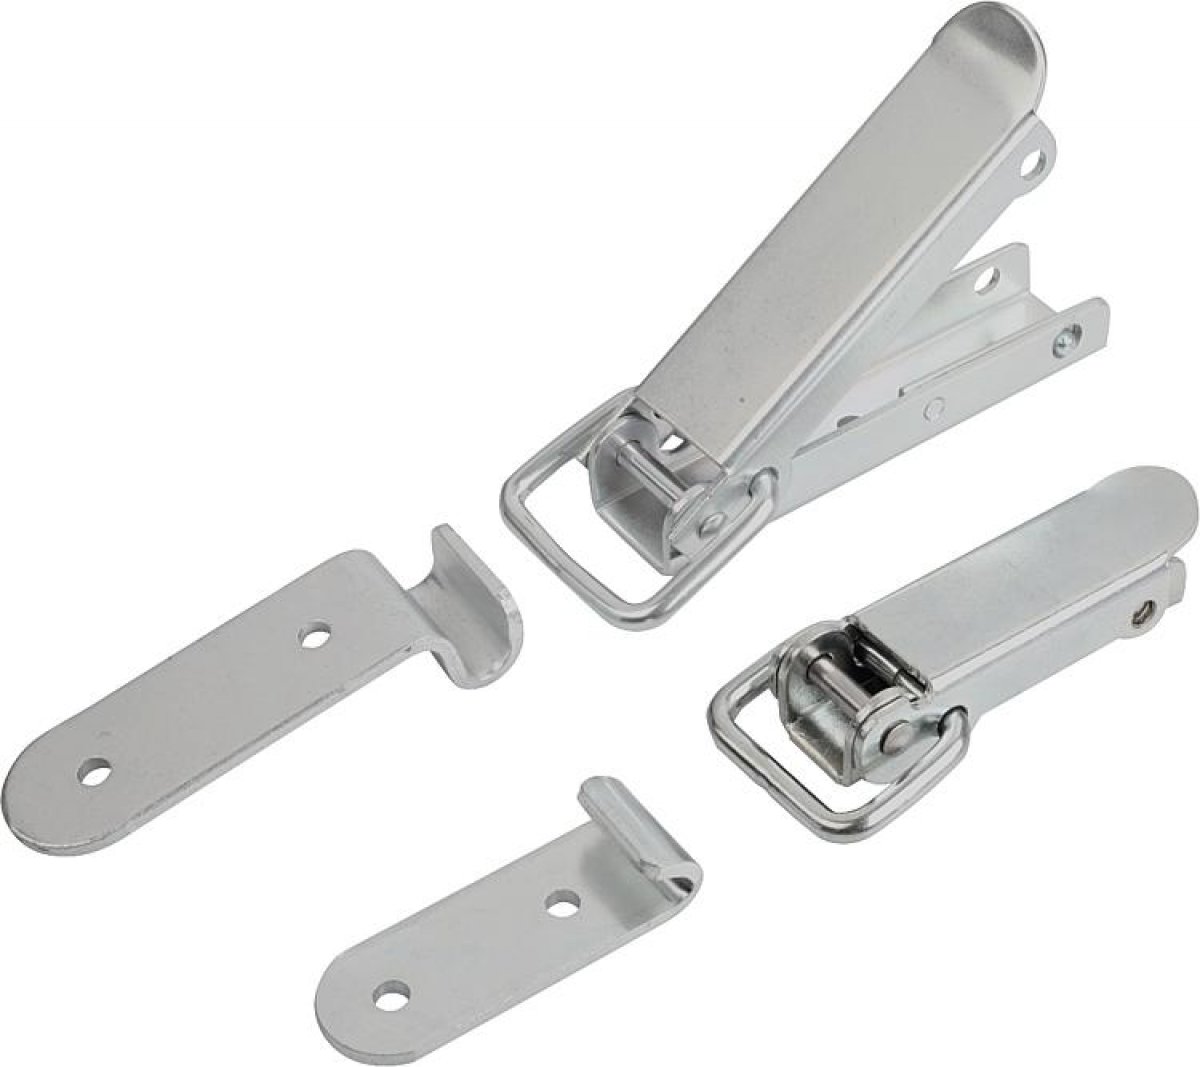 Latches with draw bail